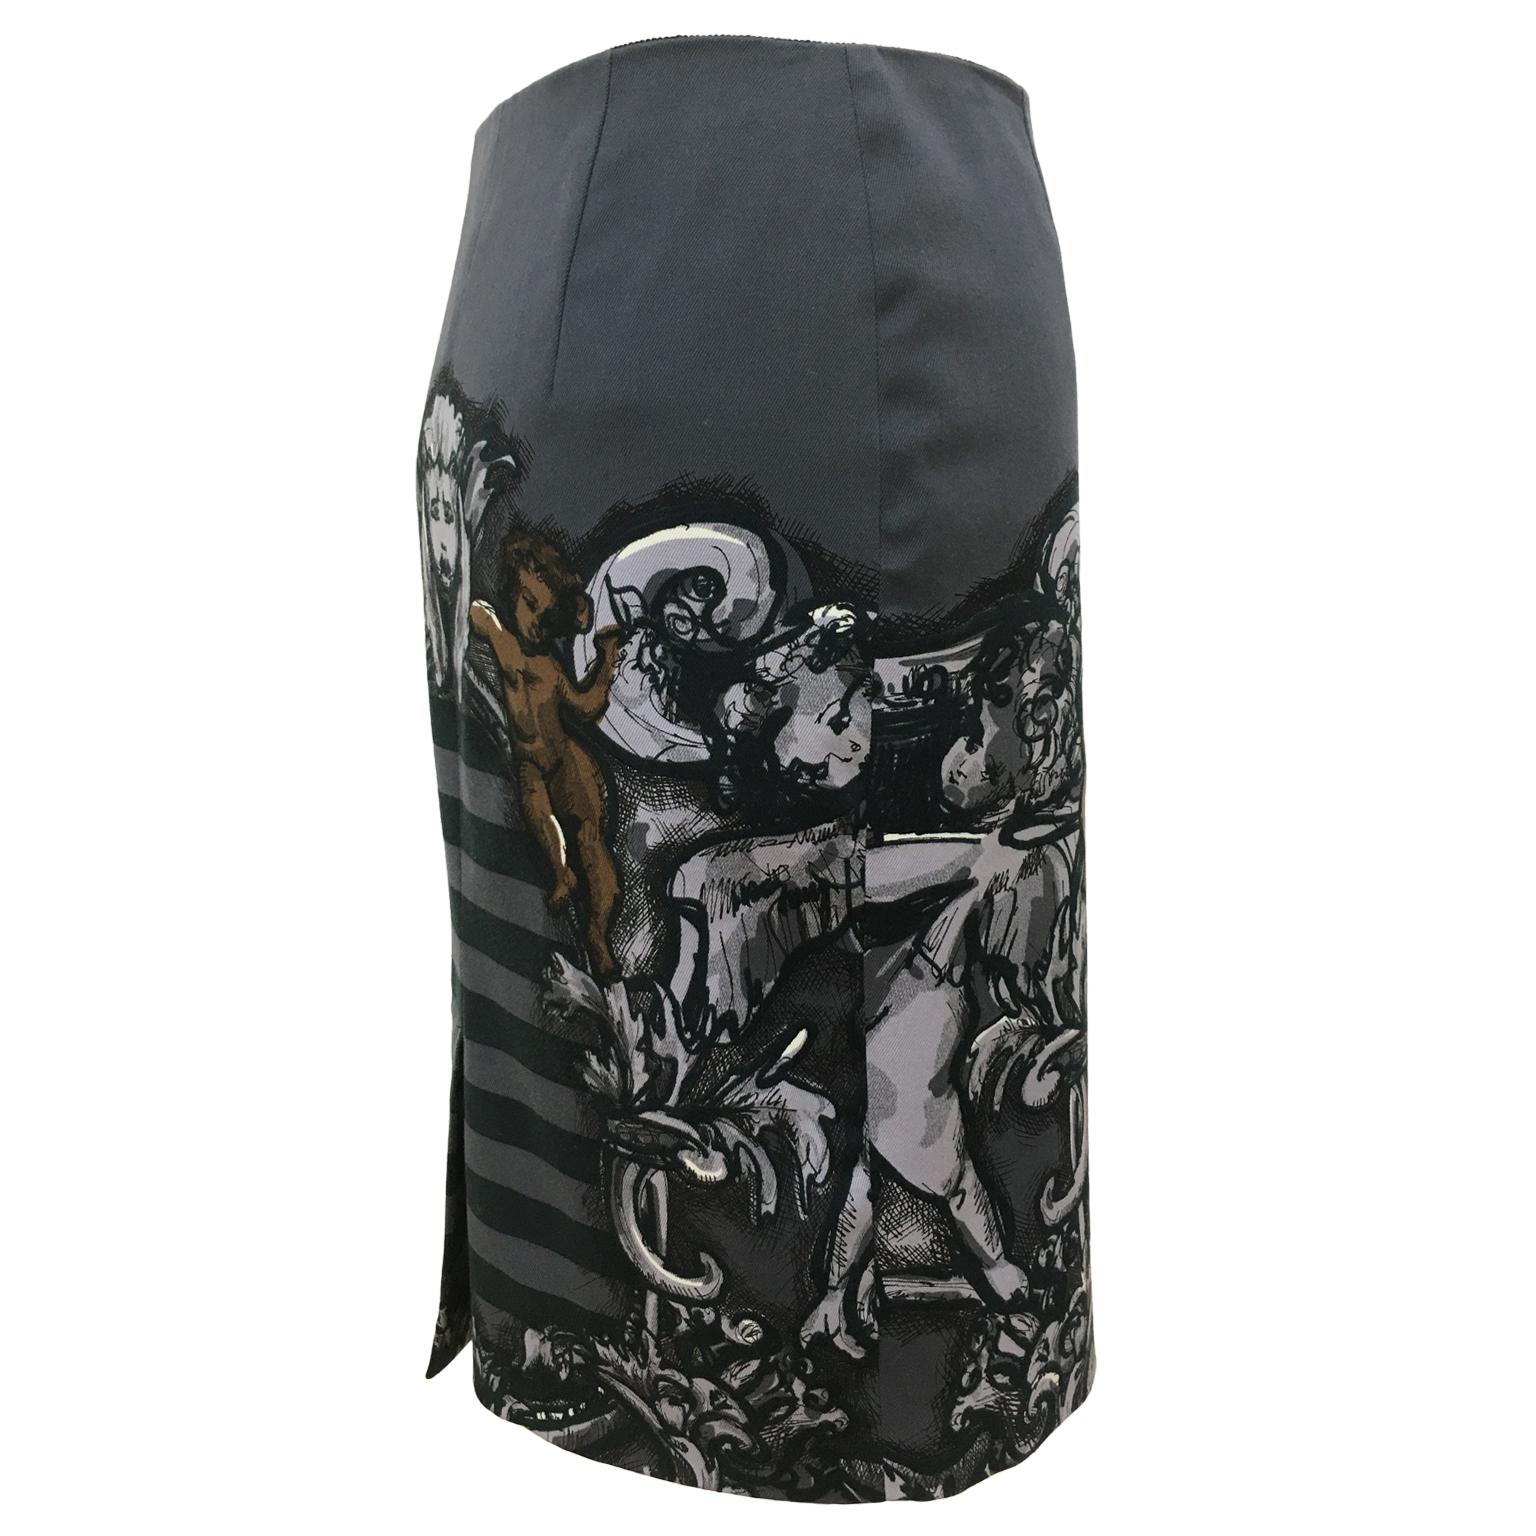 Prada show piece skirt from S/S 2011. Baroque mixing of prints that has become very iconic from this collection. Beautiful silhouette.
It closes with a blind side zipper, with lining.
Size : 36